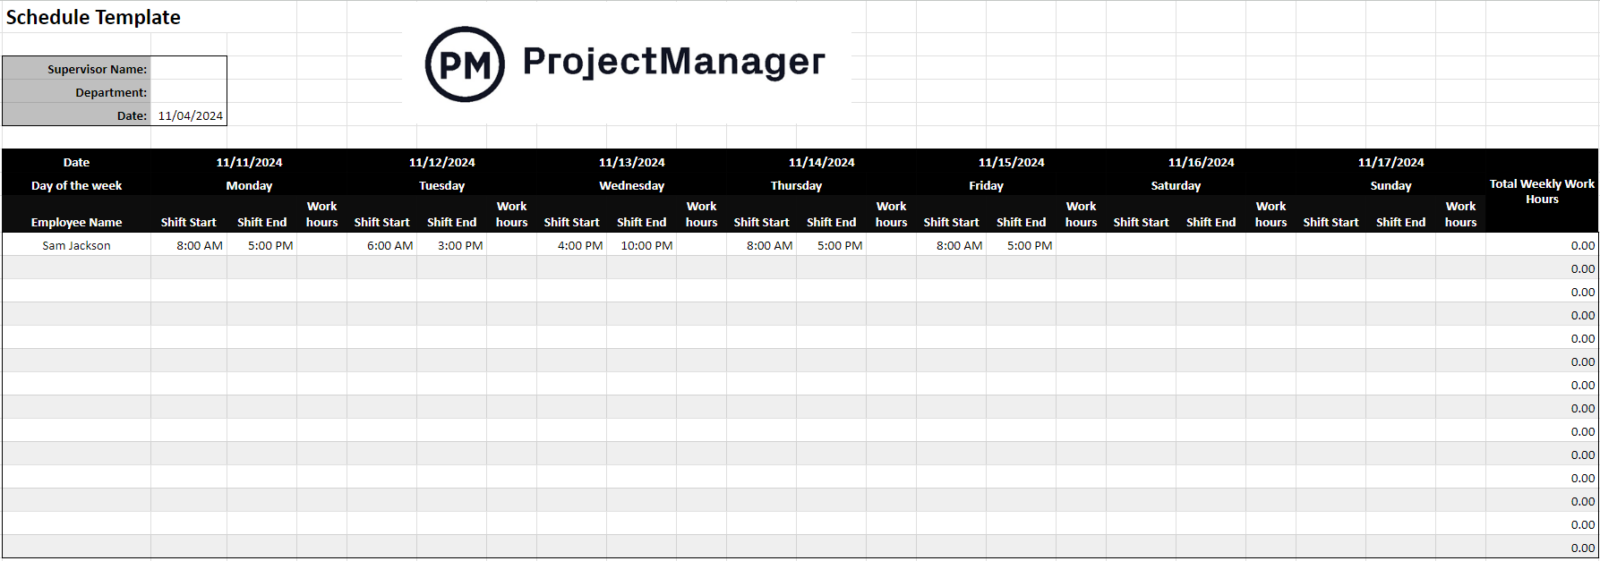 ProjectManager's schedule template for Google Sheets